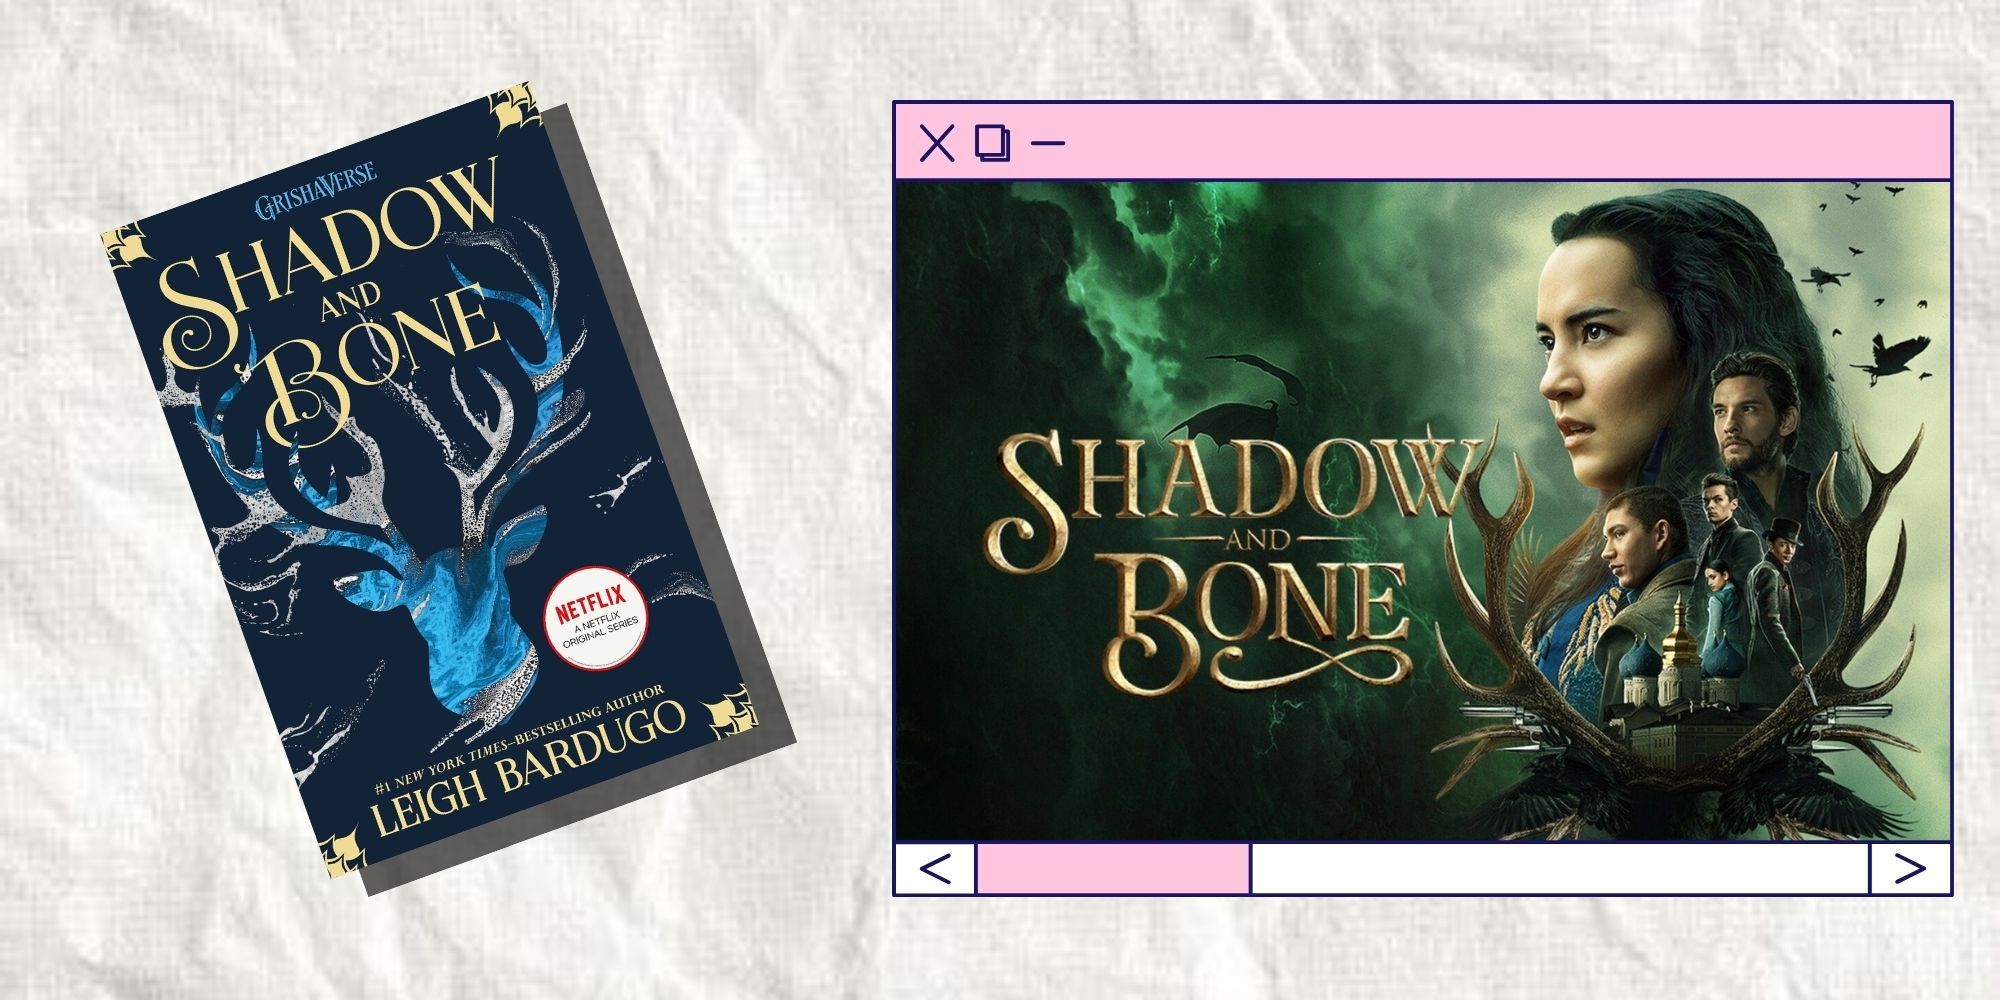 Shadow and Bone book placed next to a phone with the Netflix app